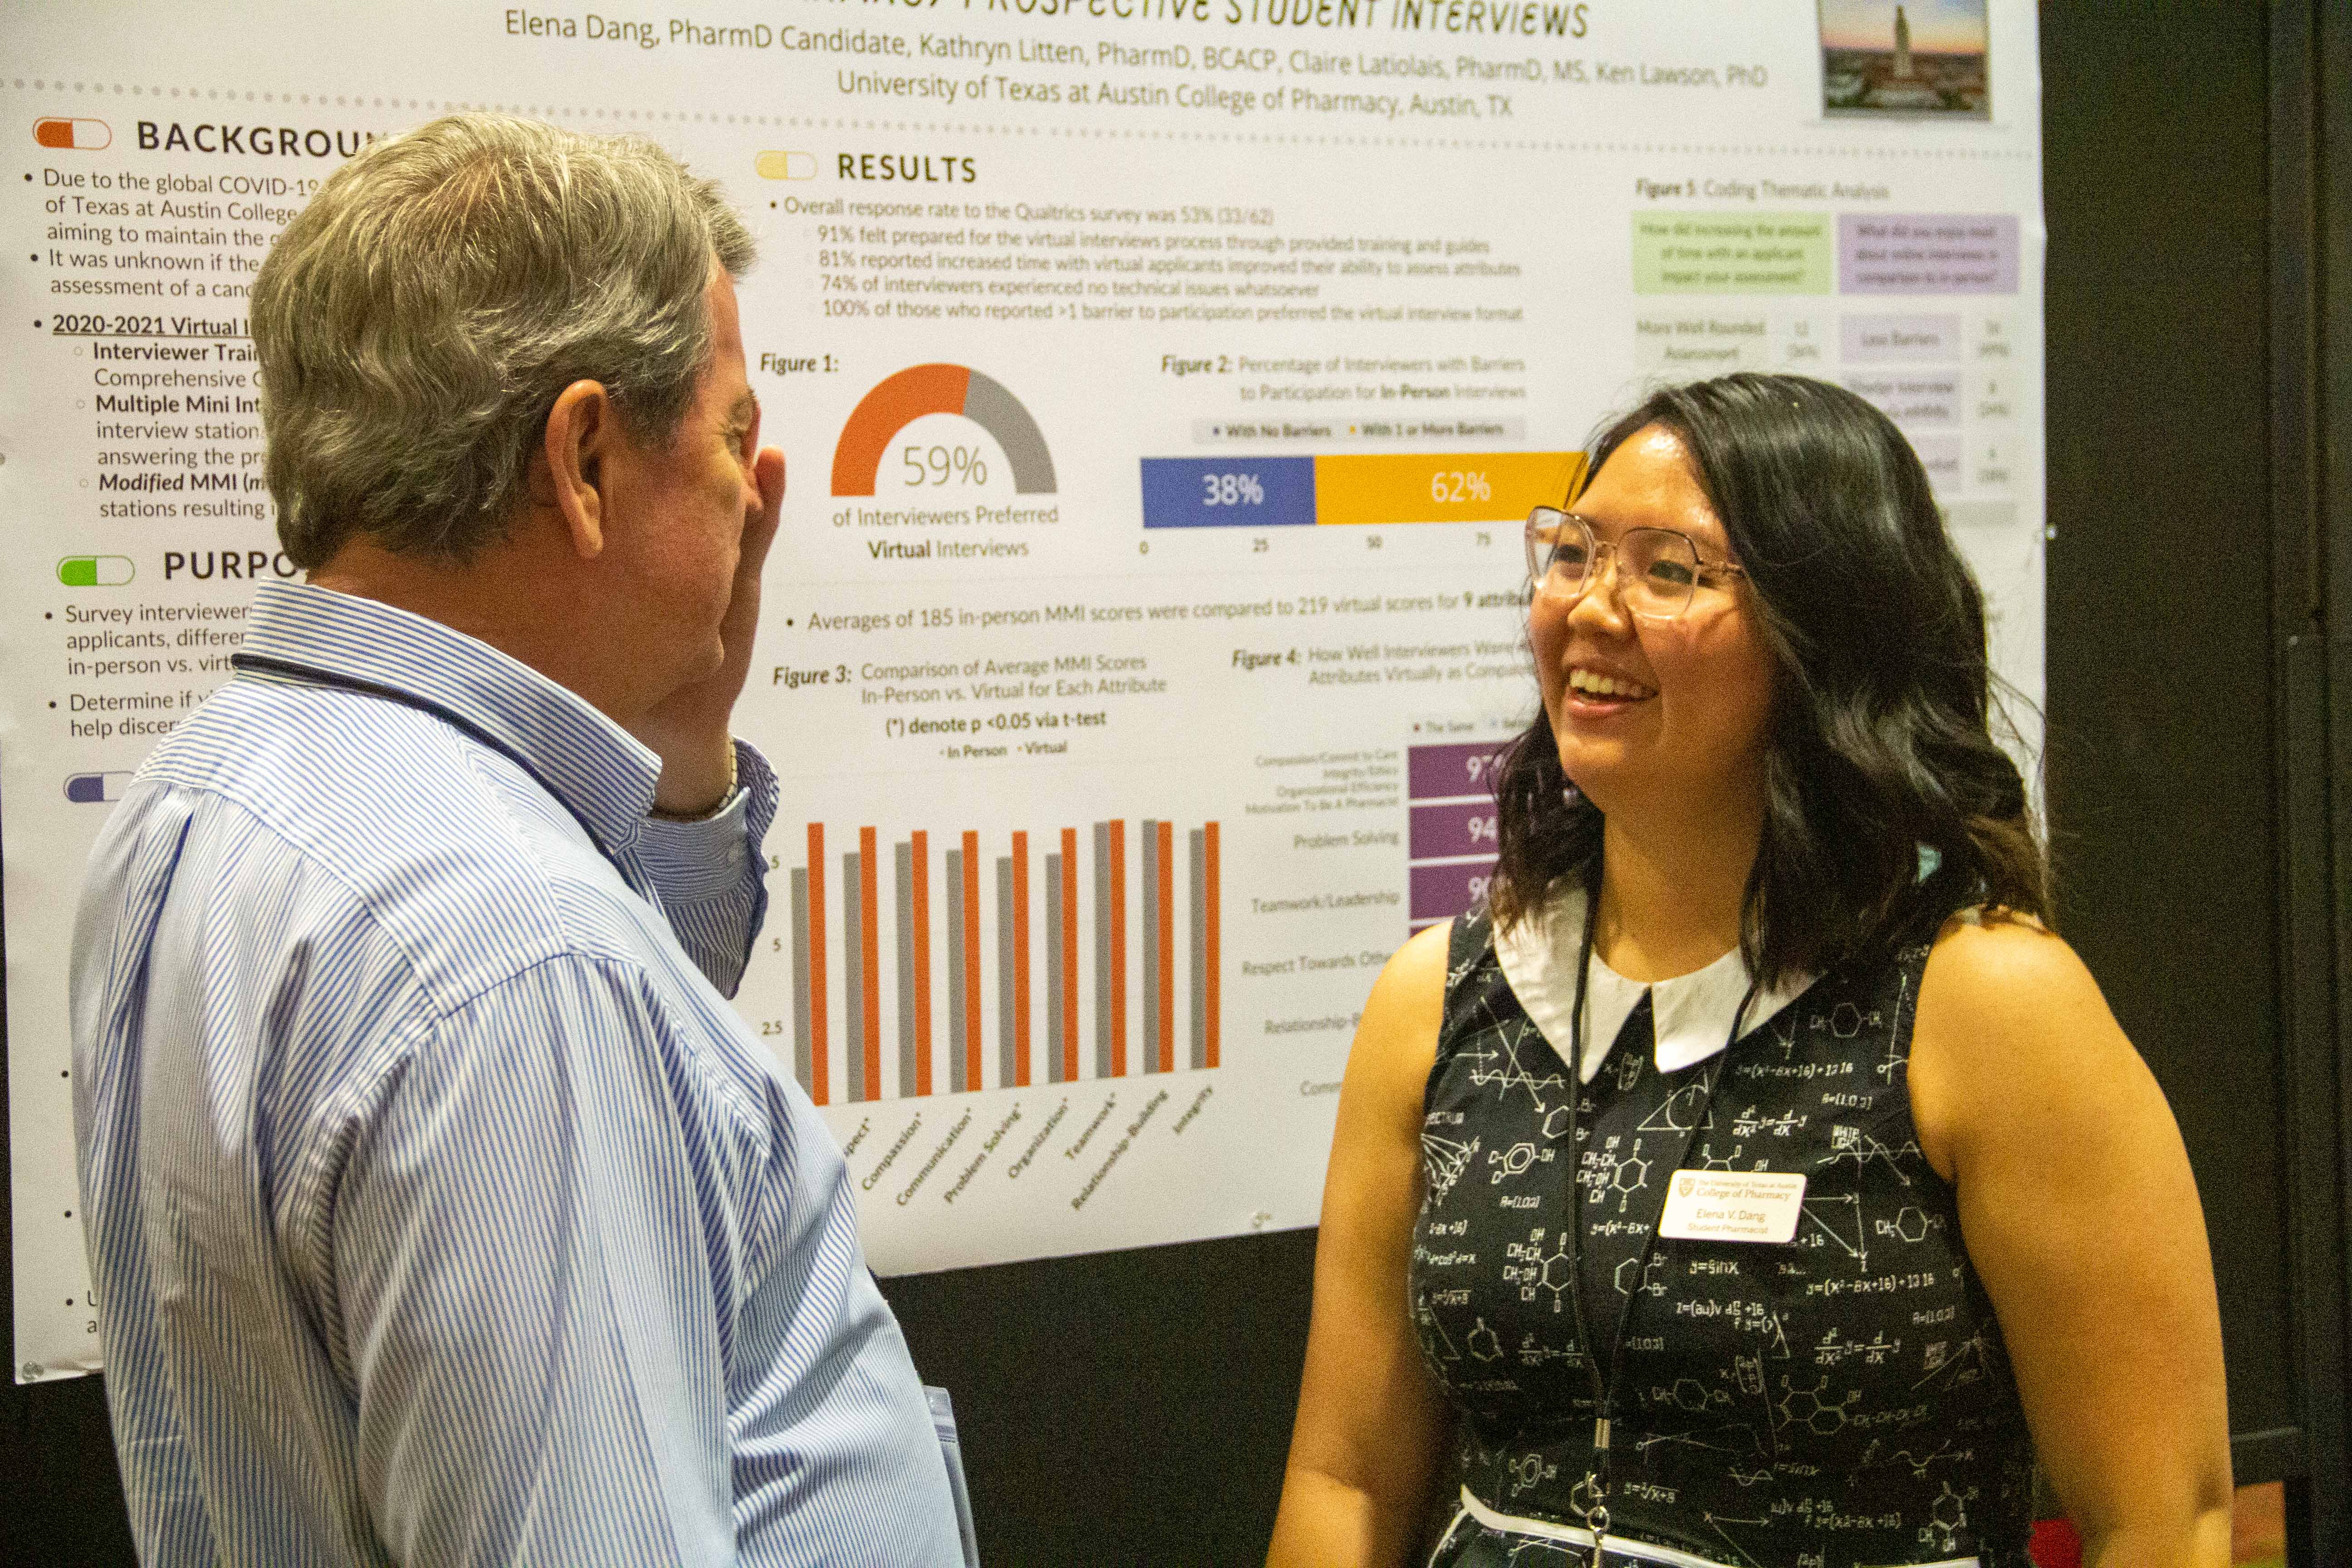 A man and a woman in conversation in front of a scientific poster board.